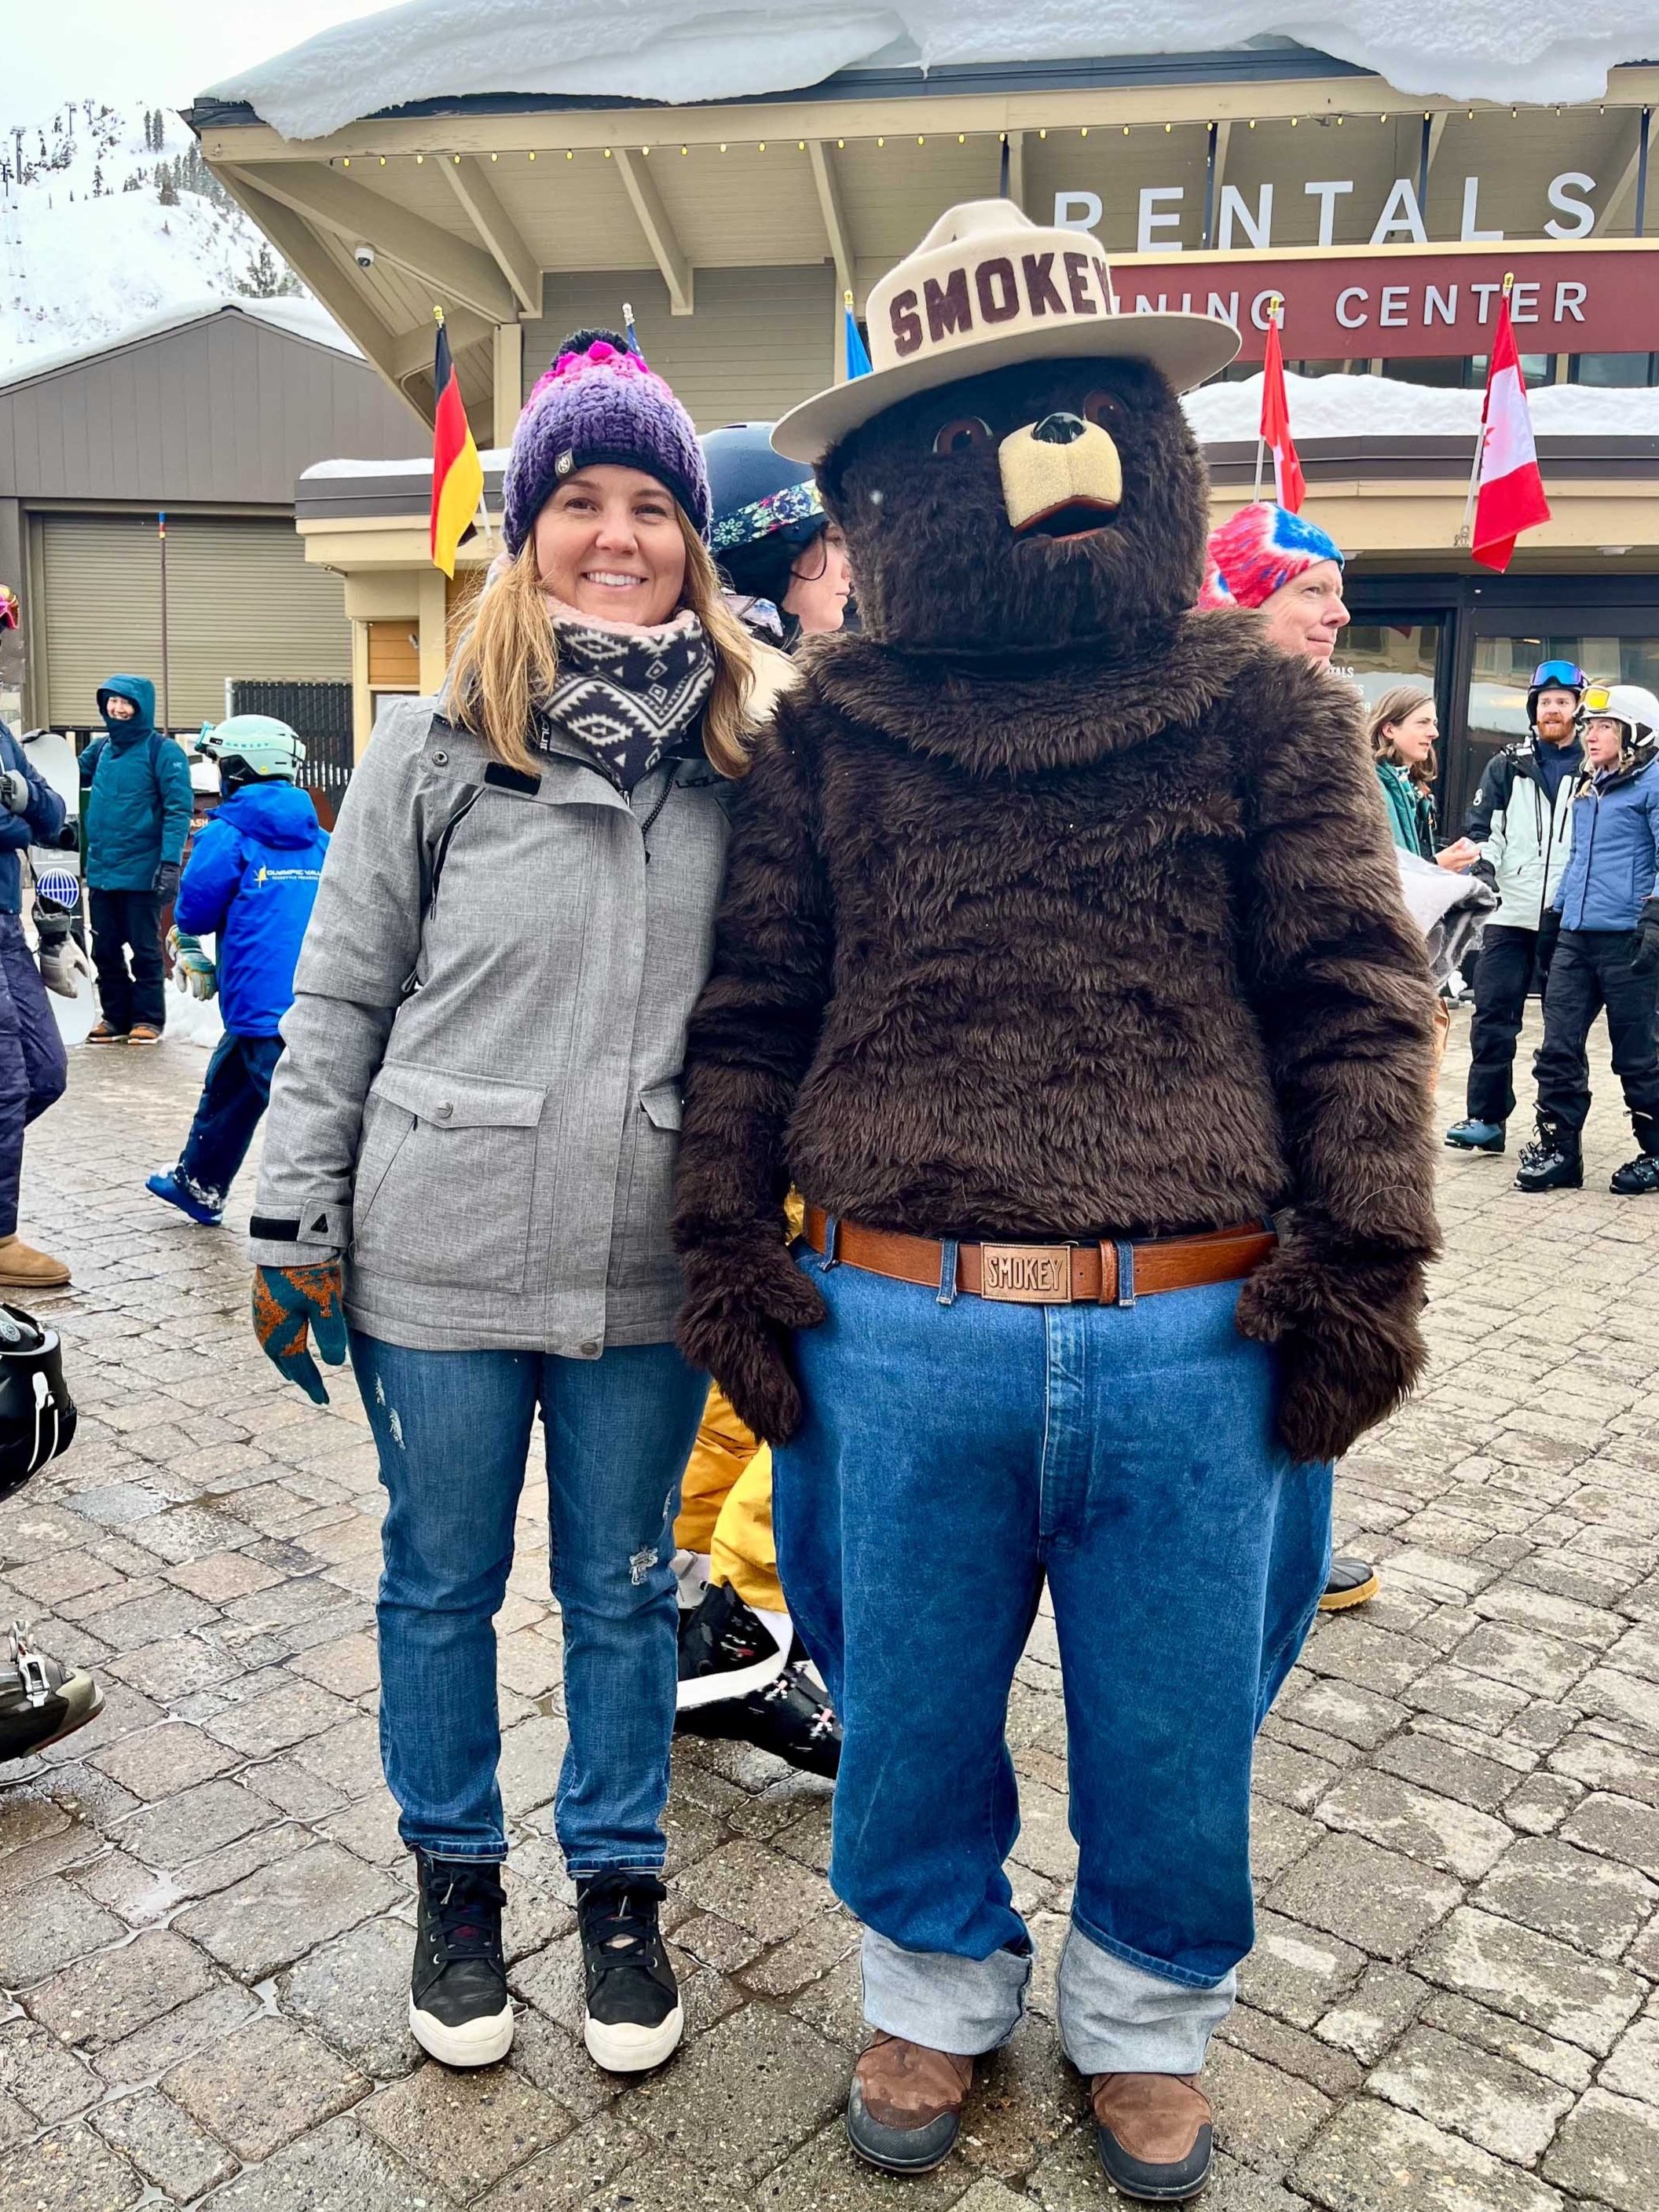 At home in Truckee, California with Smokey the Bear!